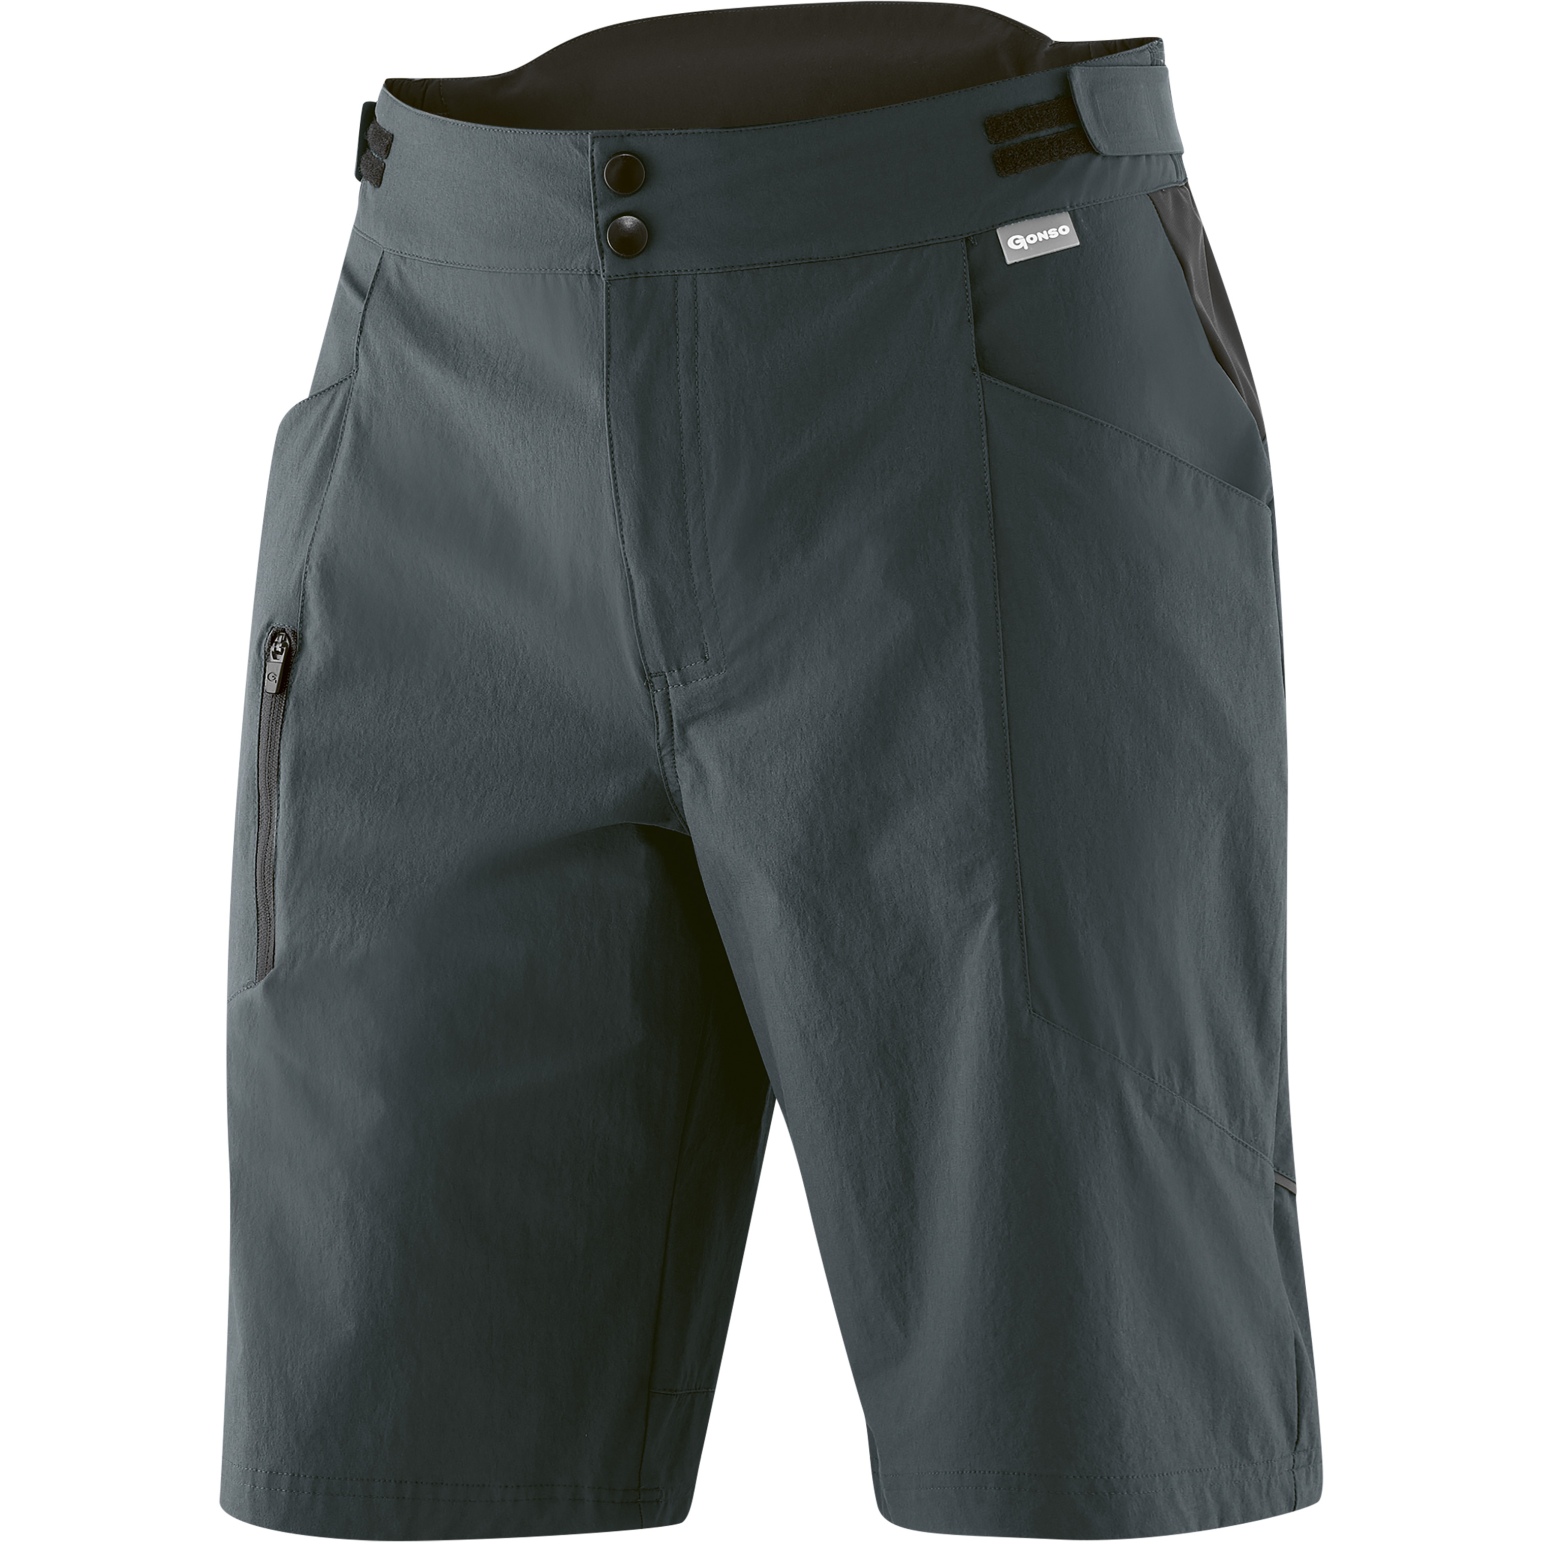 Picture of Gonso Orco Bike Shorts Men - Graphite